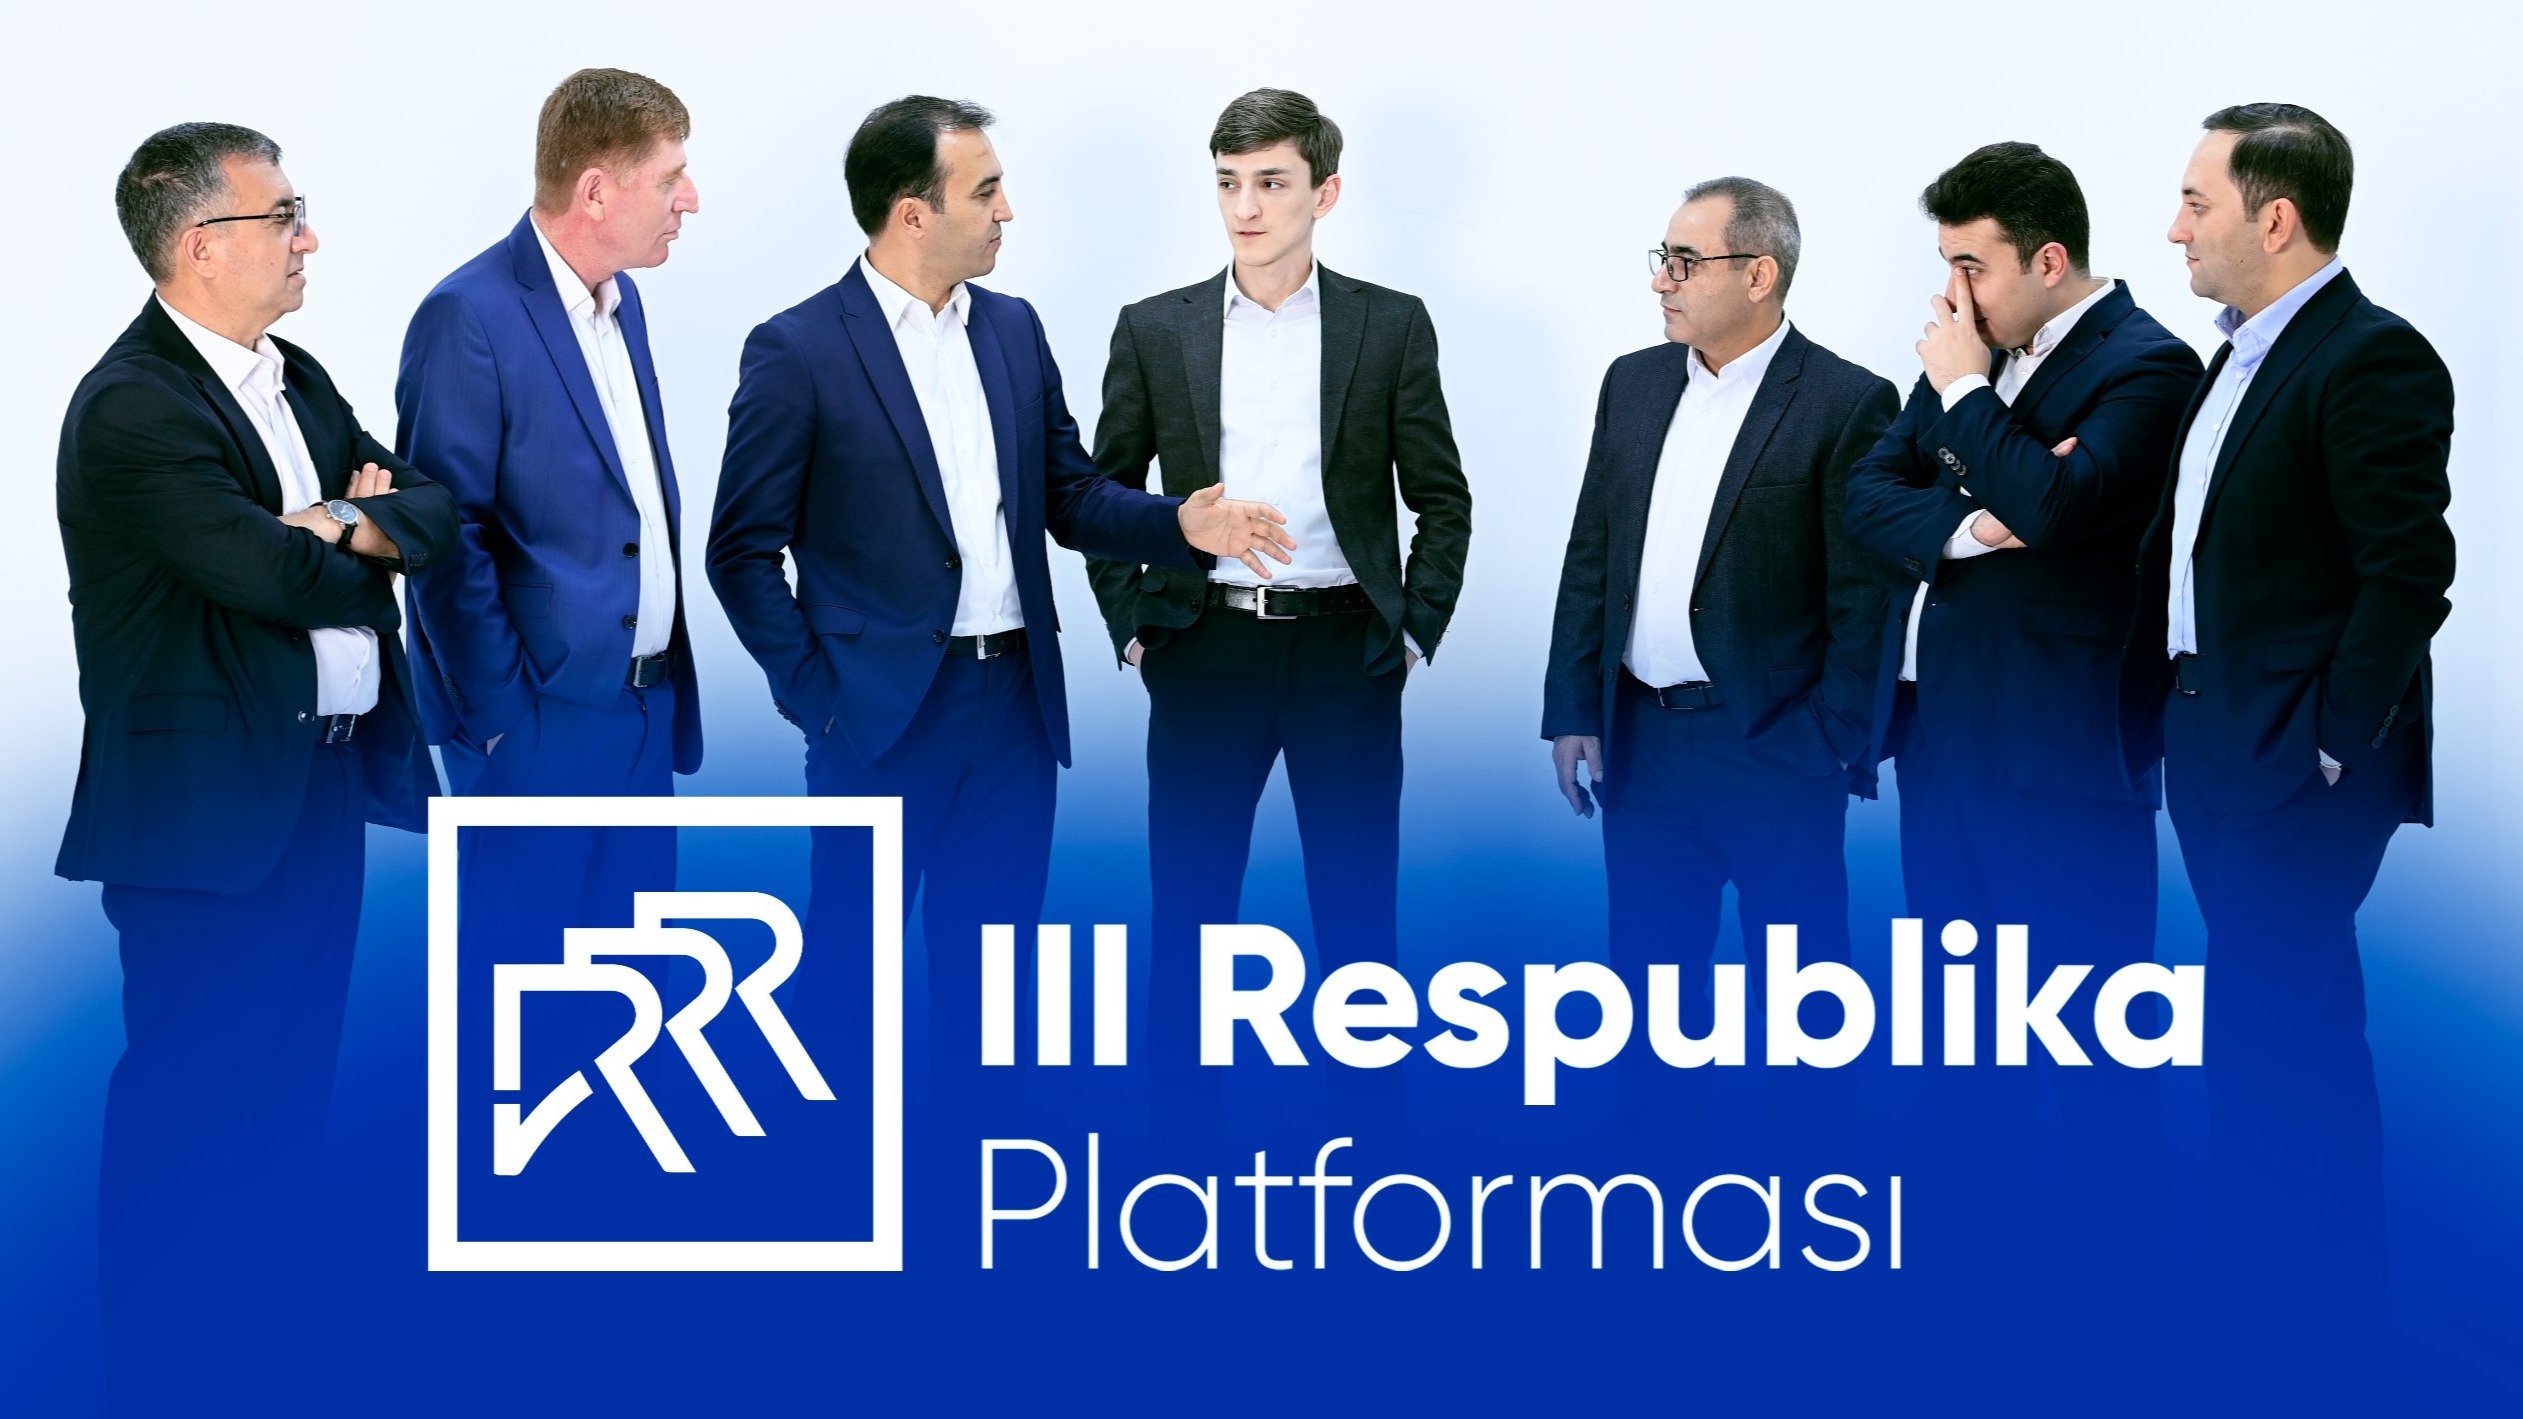 The "Platform III Republic" does not nominate a candidate and calls for voting against candidates from power in the presidential elections